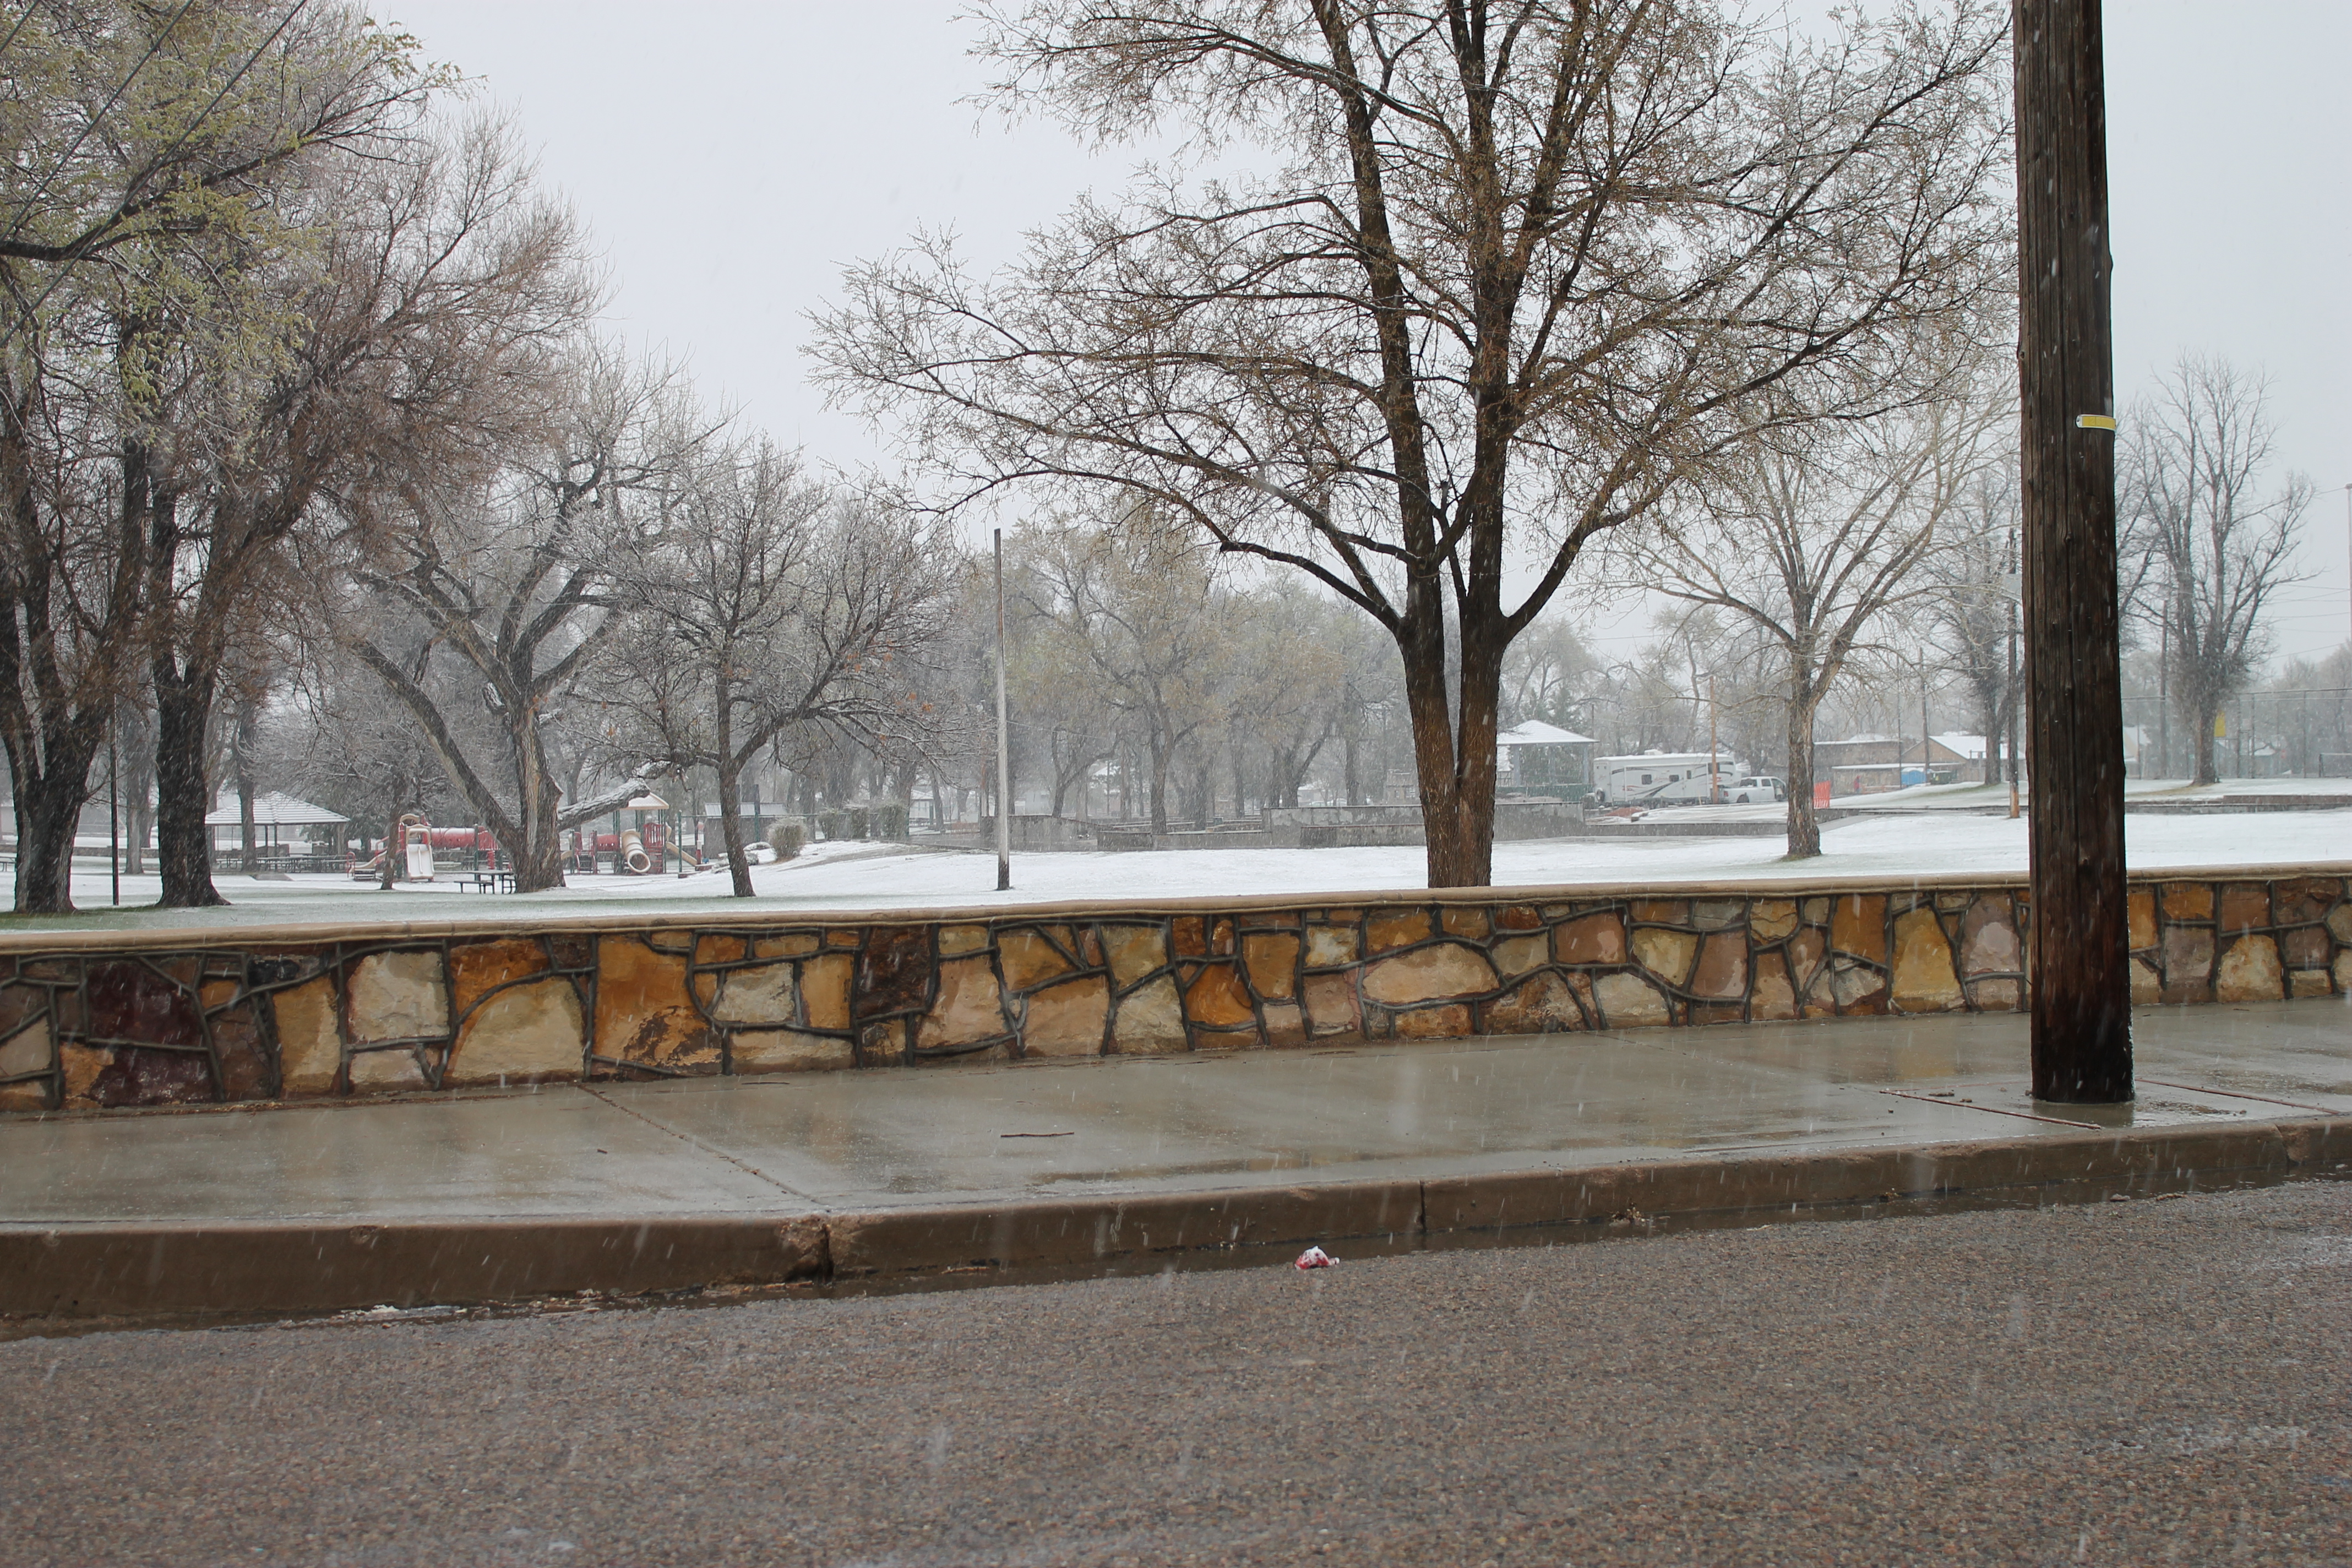 A photo of La Junta City Park Wall, a stone wall a couple of feet high set back from the road. Snow is on the ground.